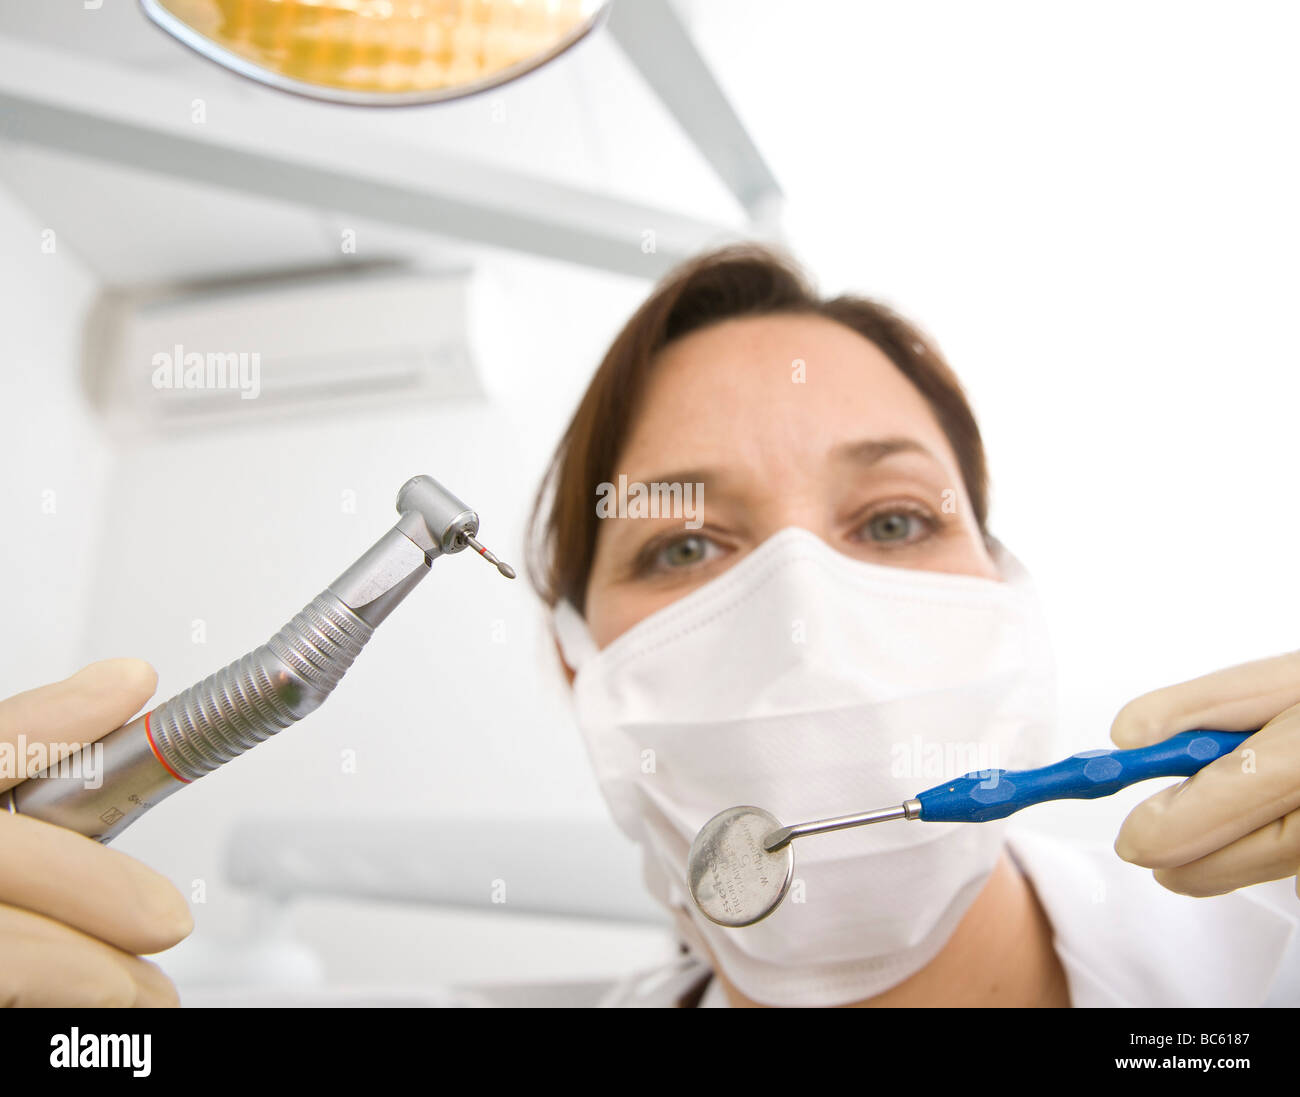 Portrait of female dentist holding dental drill and angled mirror Stock Photo